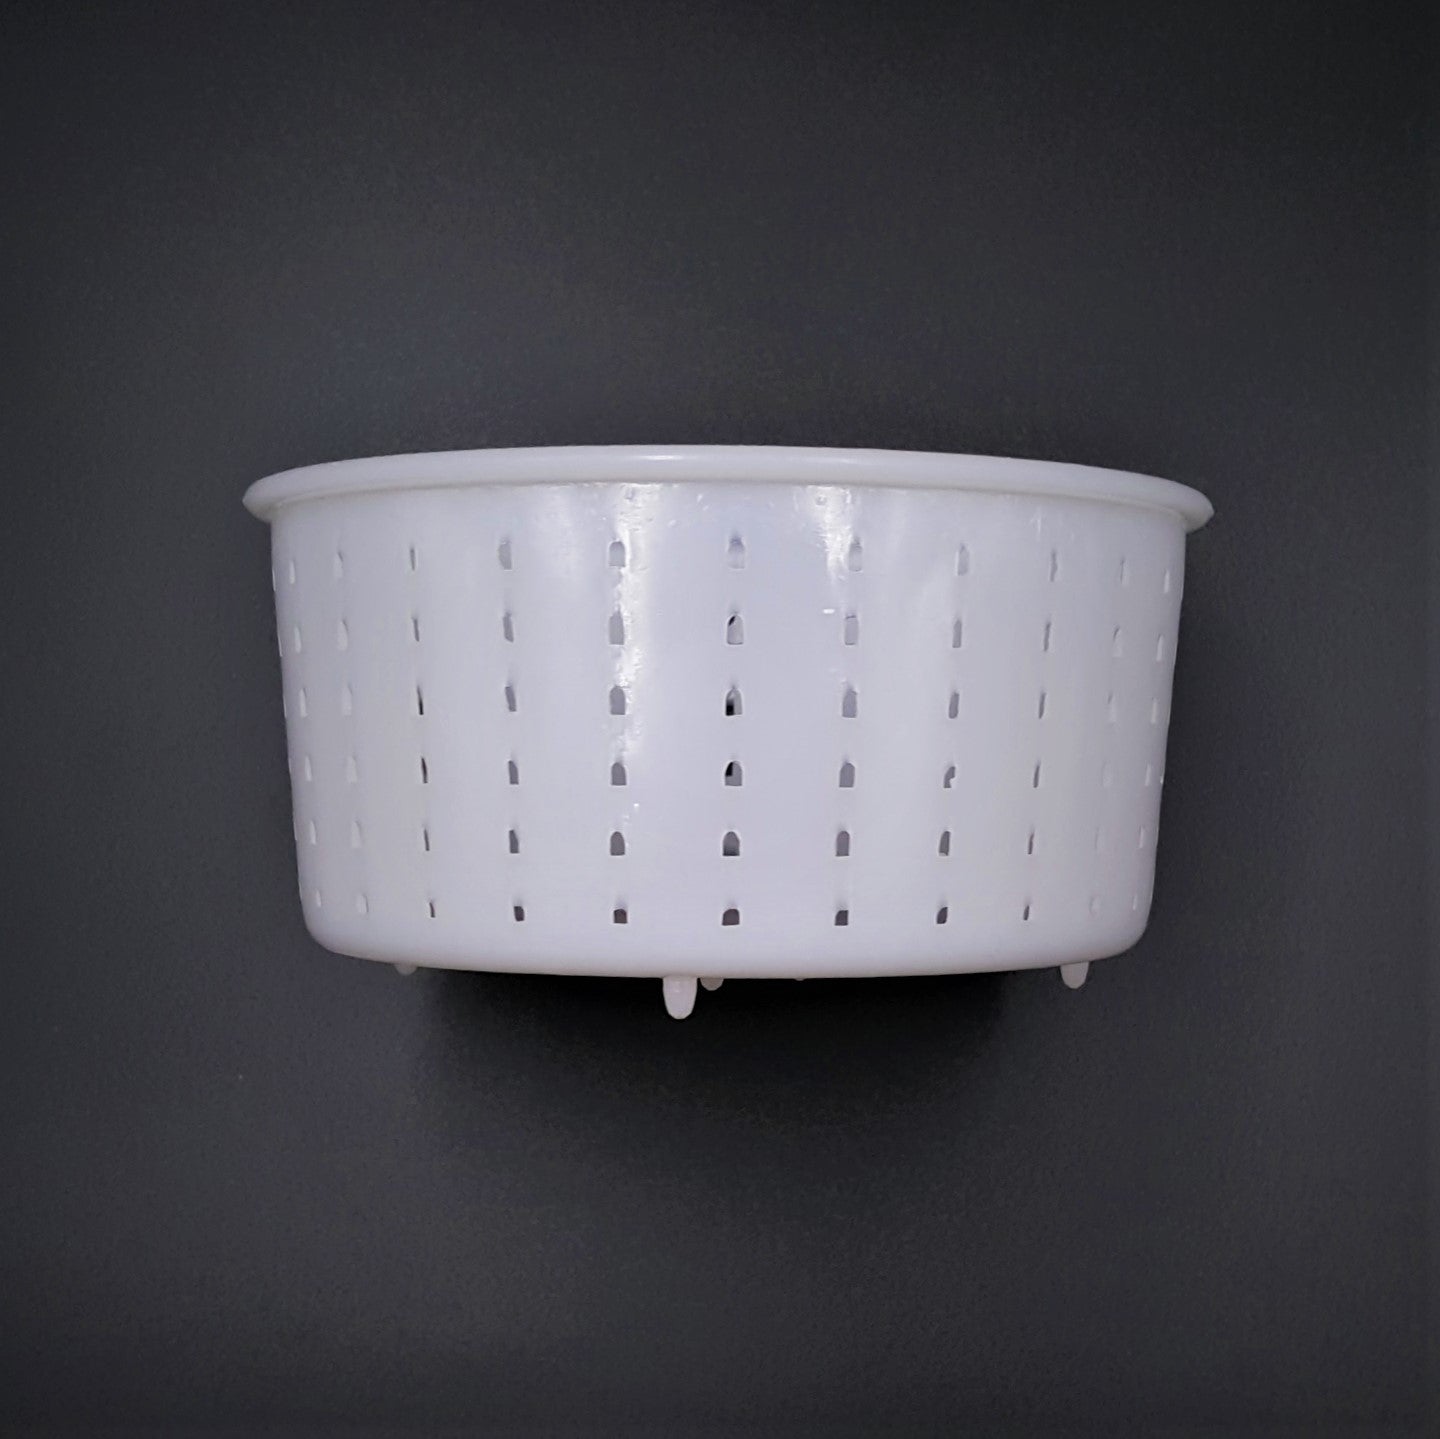 White food grade plastic Hard Cheese Small Hoop Mould Diam-14.5cm x H-7.3cm used to shape cheeses. 